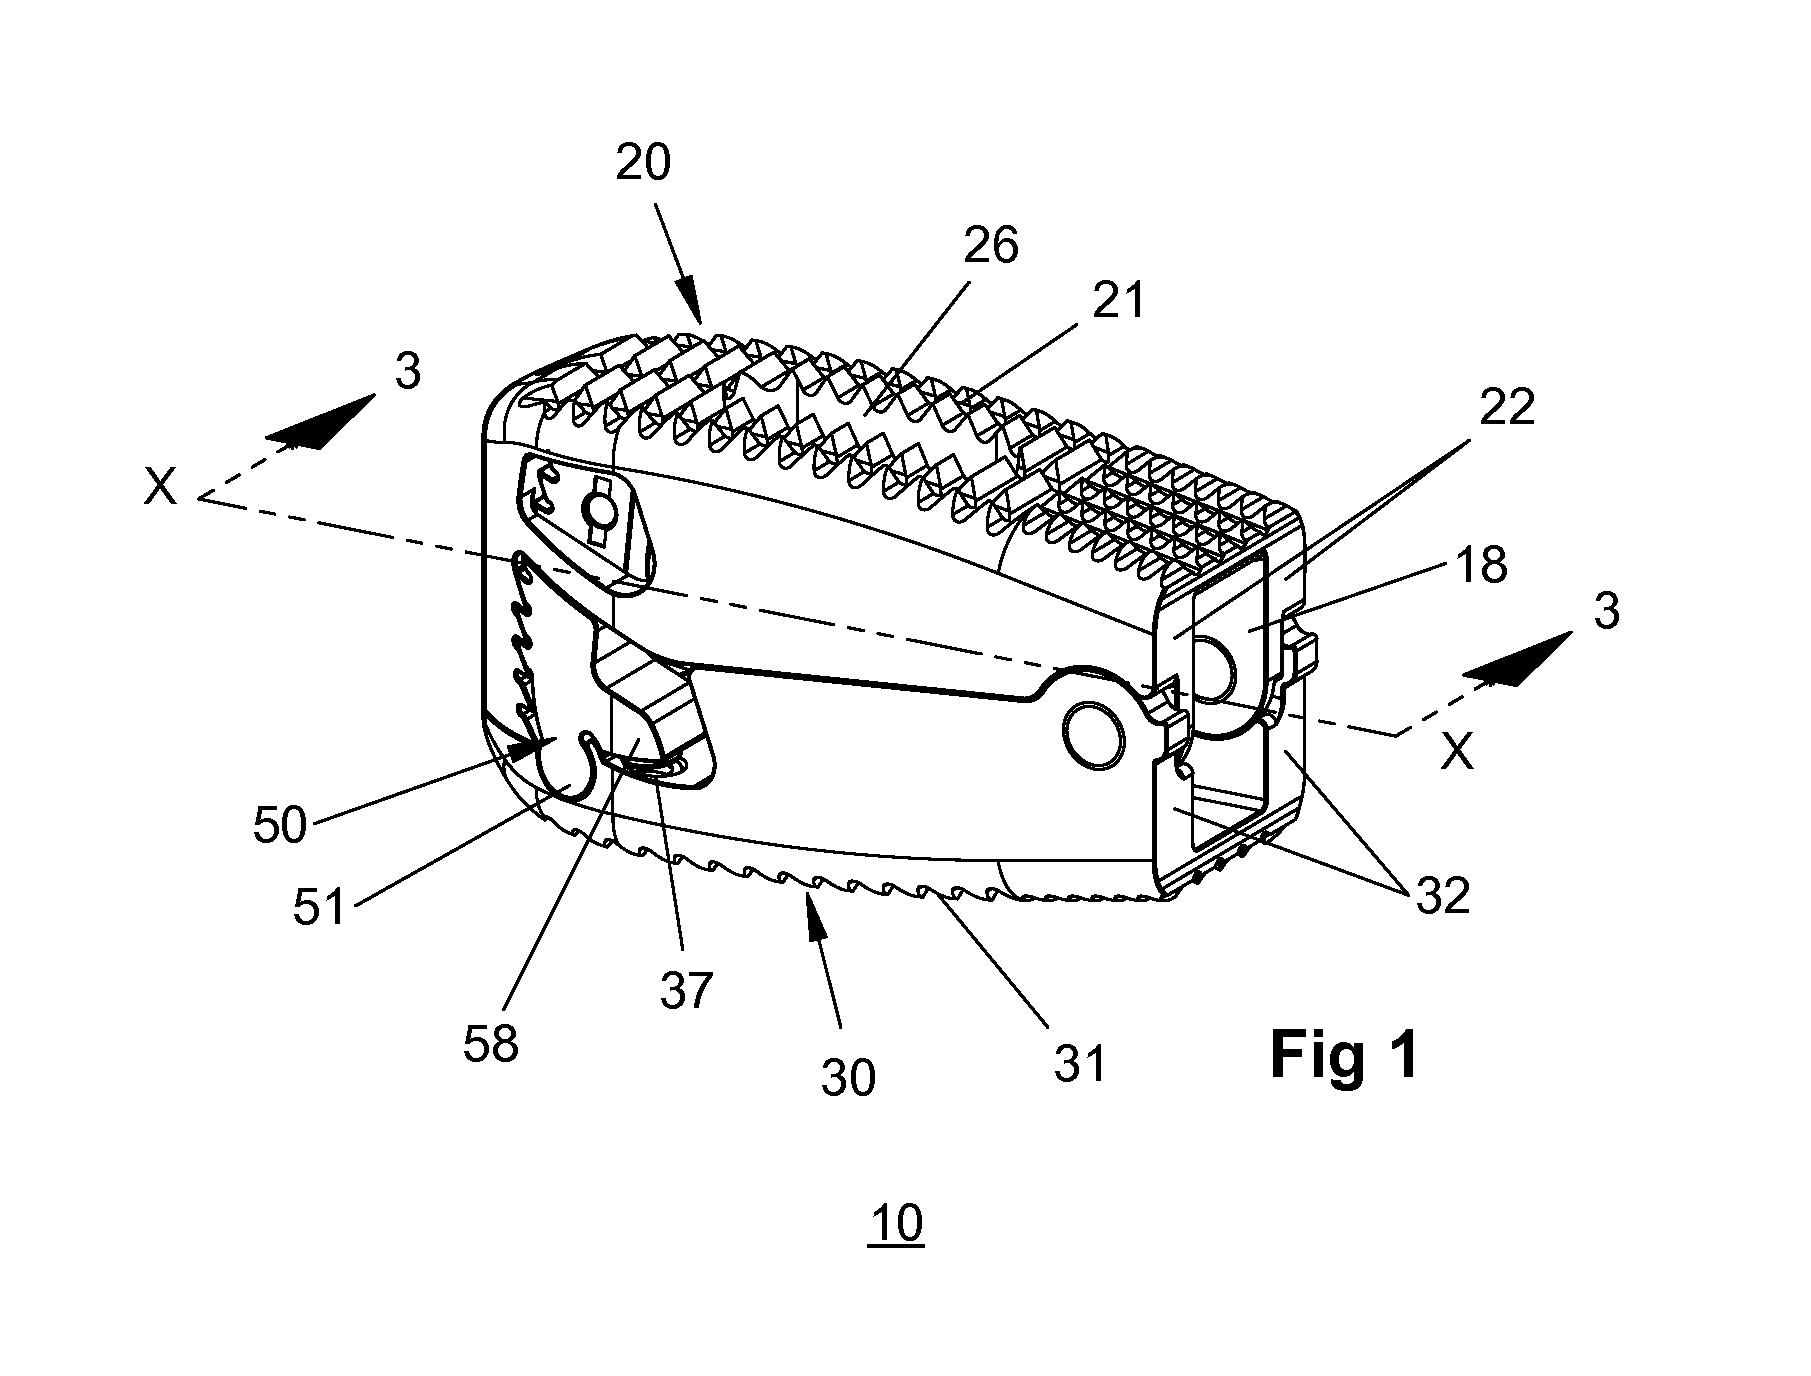 Adjustable Implant and Insertion Tool